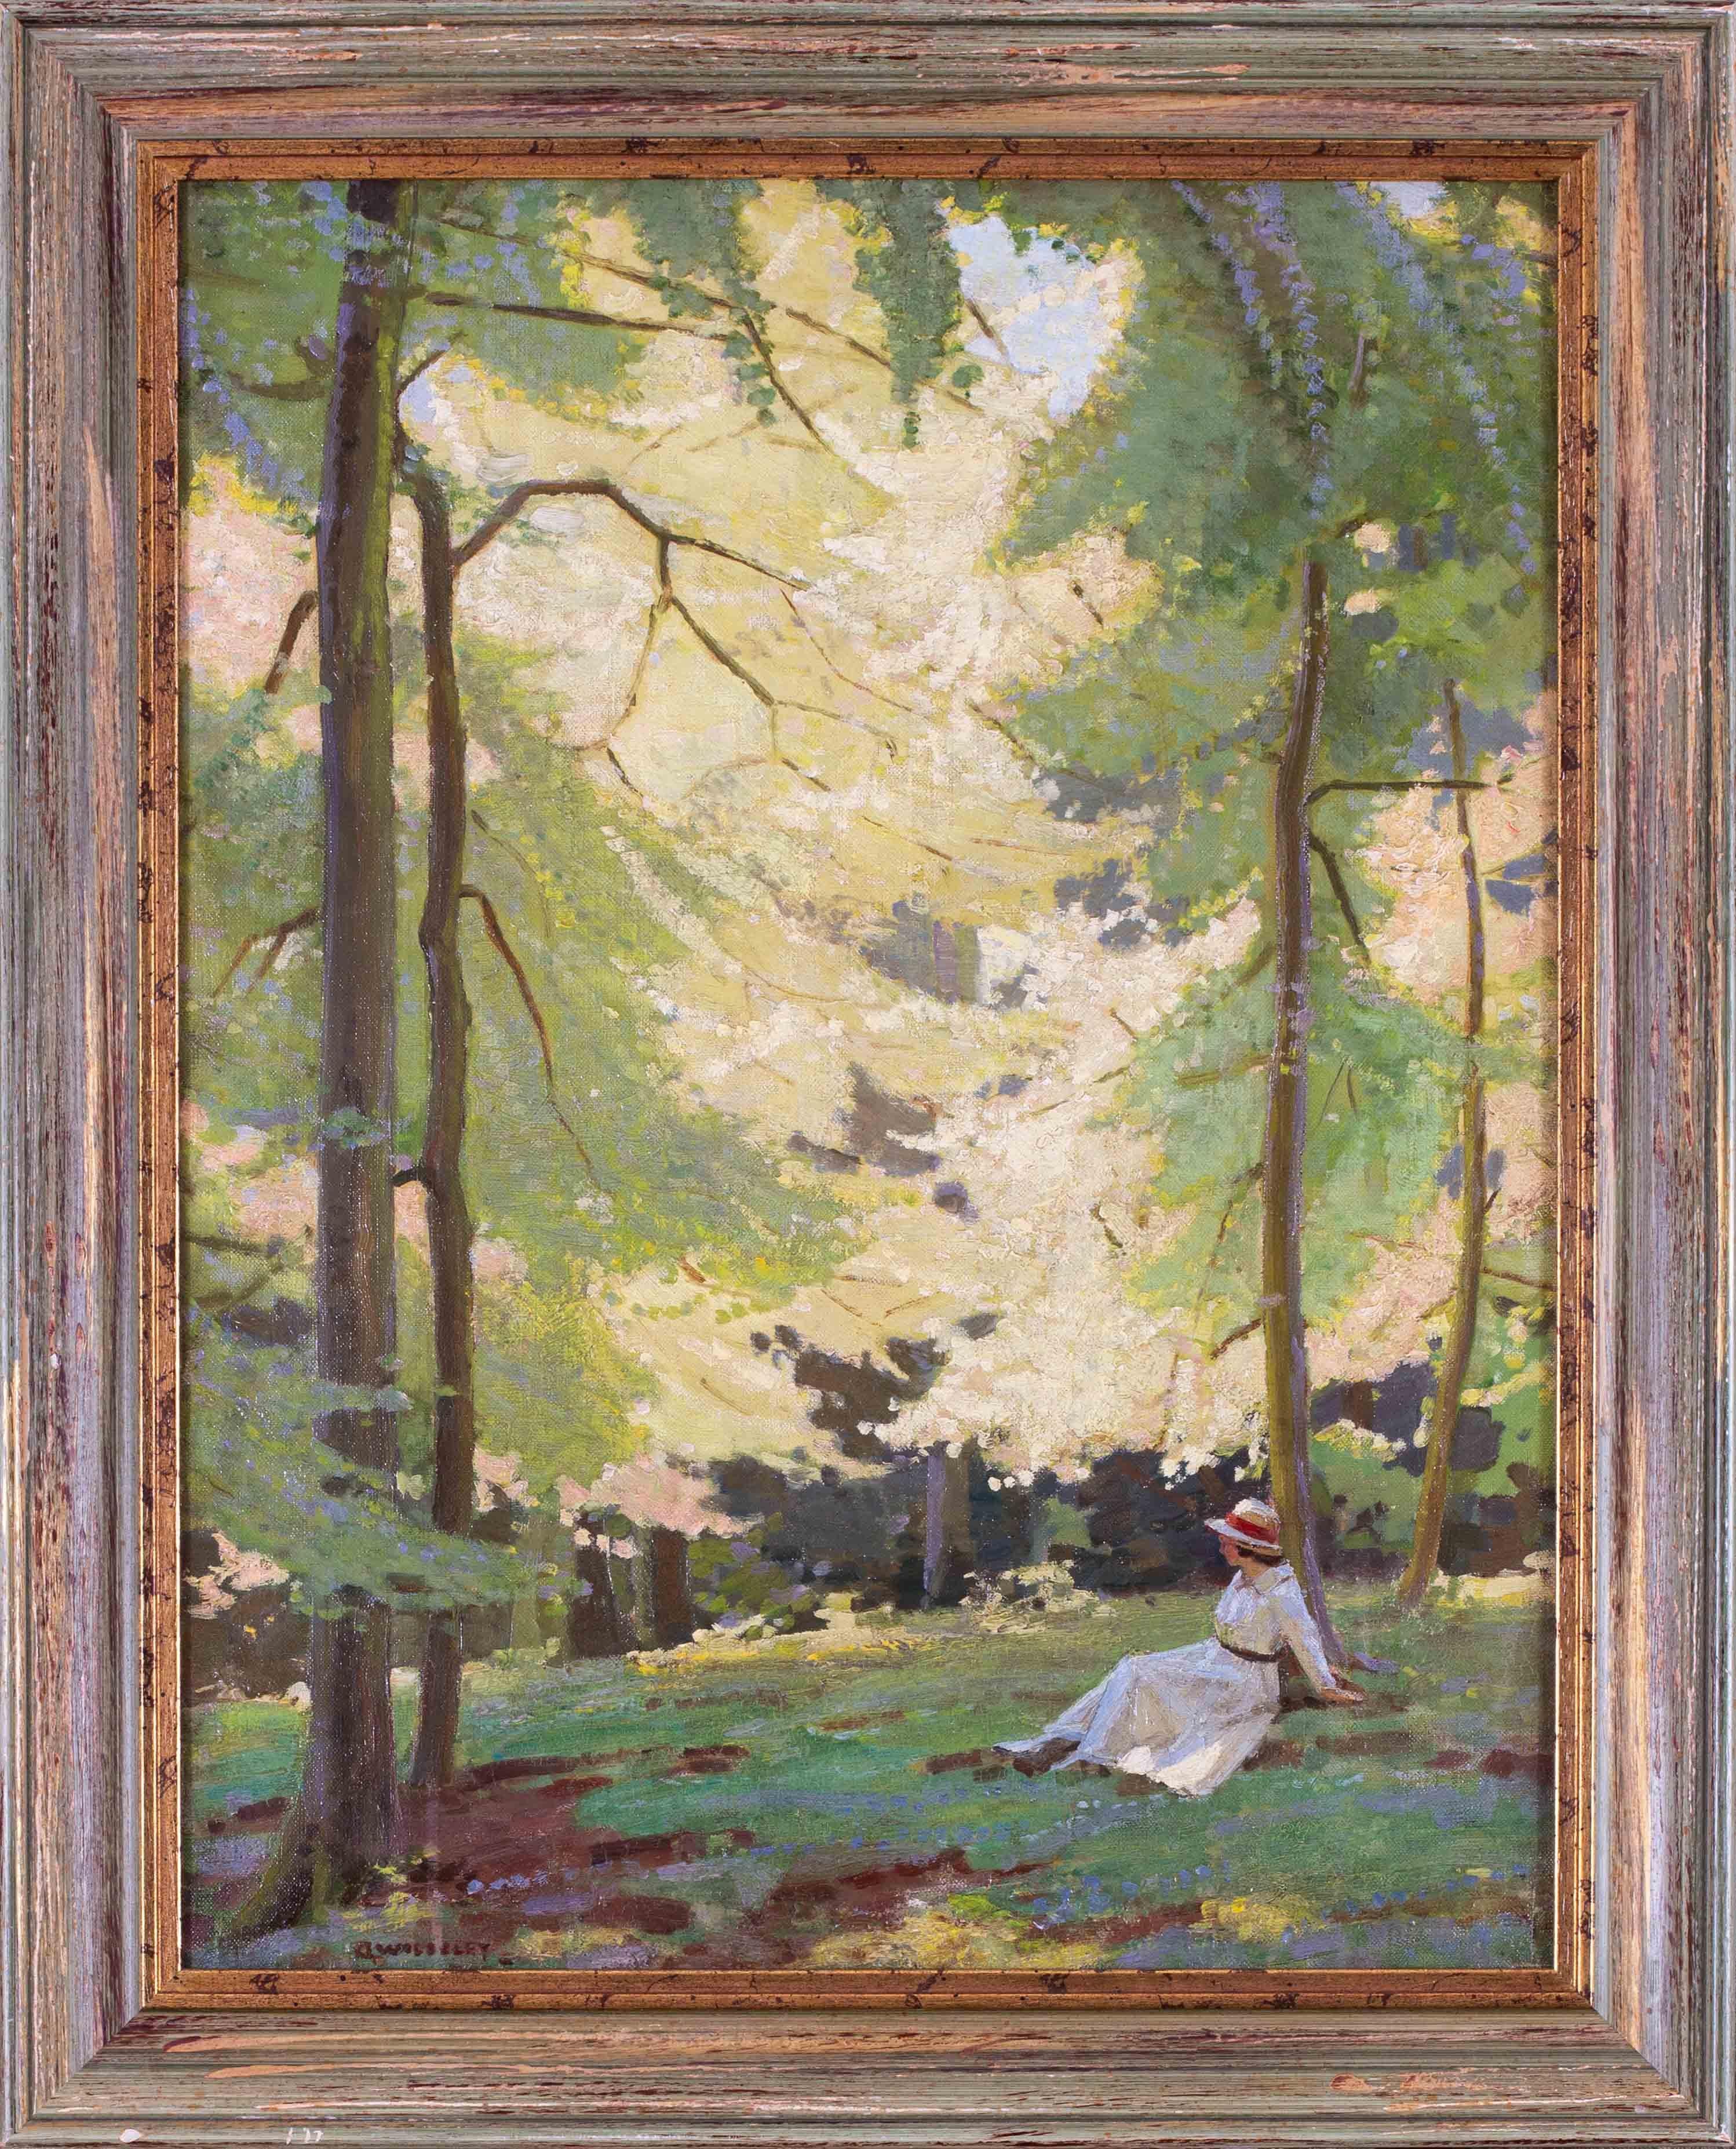 GARNET RUSKIN WOLSELEY Figurative Painting - British, 20th Century oil painting of lady under a canopy of green foliage